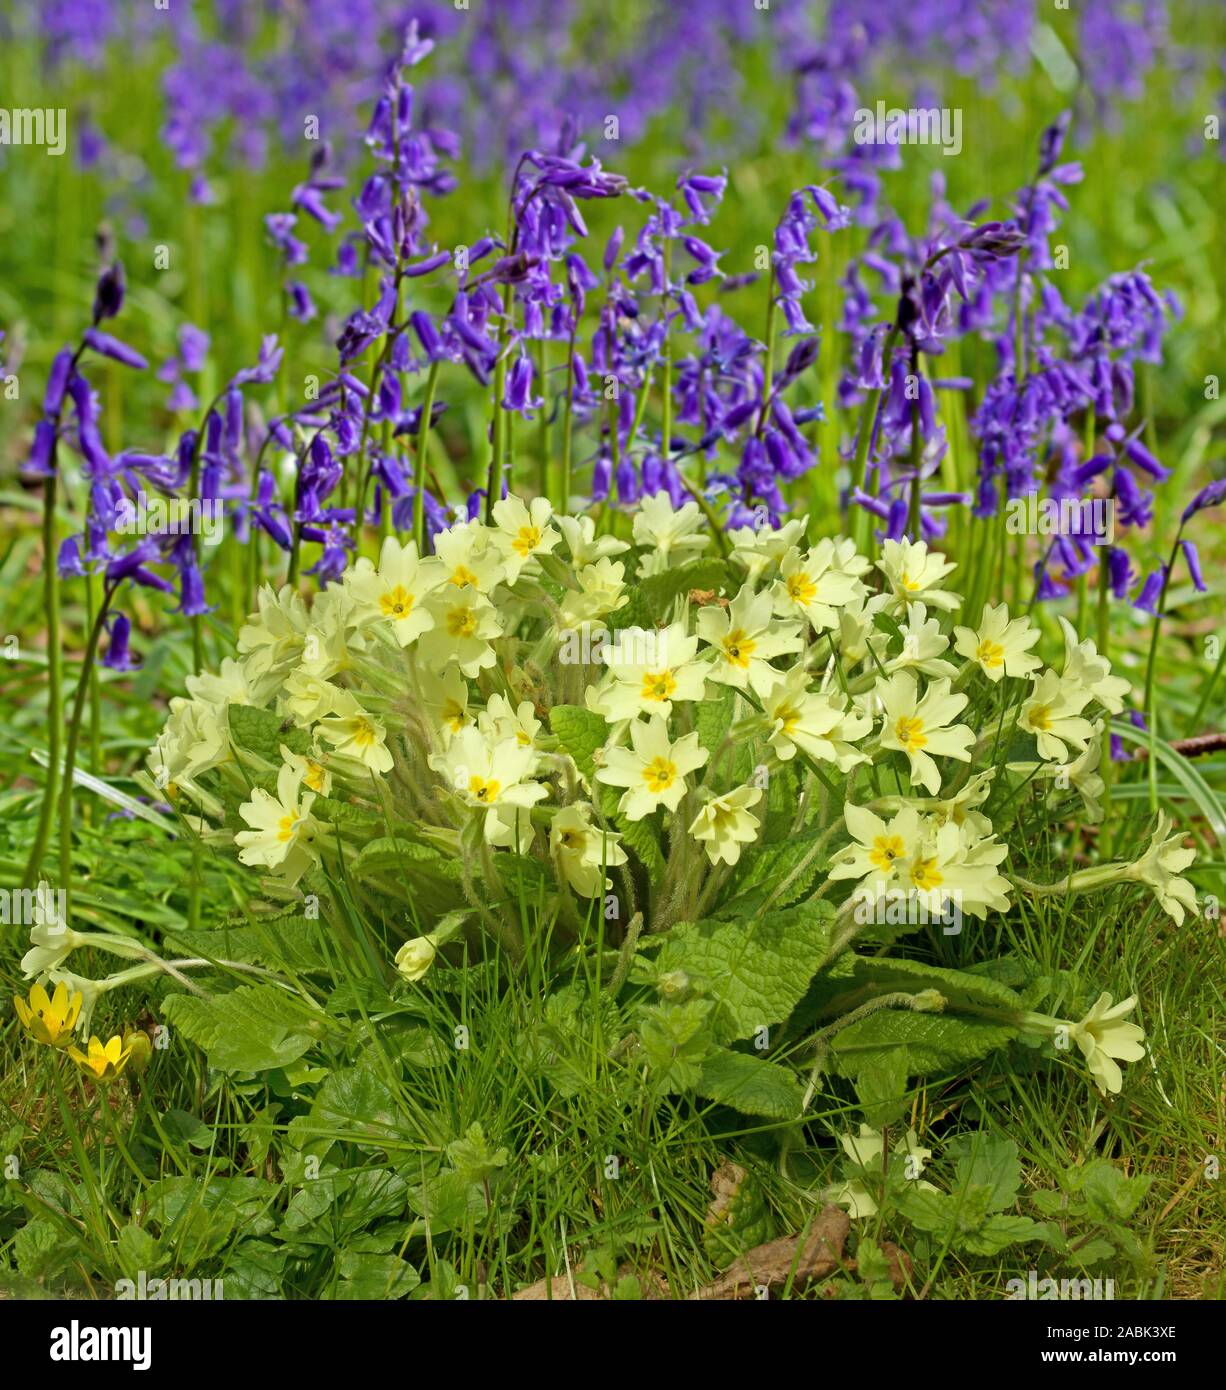 Flowering Common Cowslips (Primula veris) and English Bluebell (Hyacinthoides nonscripta) flowering in forest, Essex, Great Britain Stock Photo